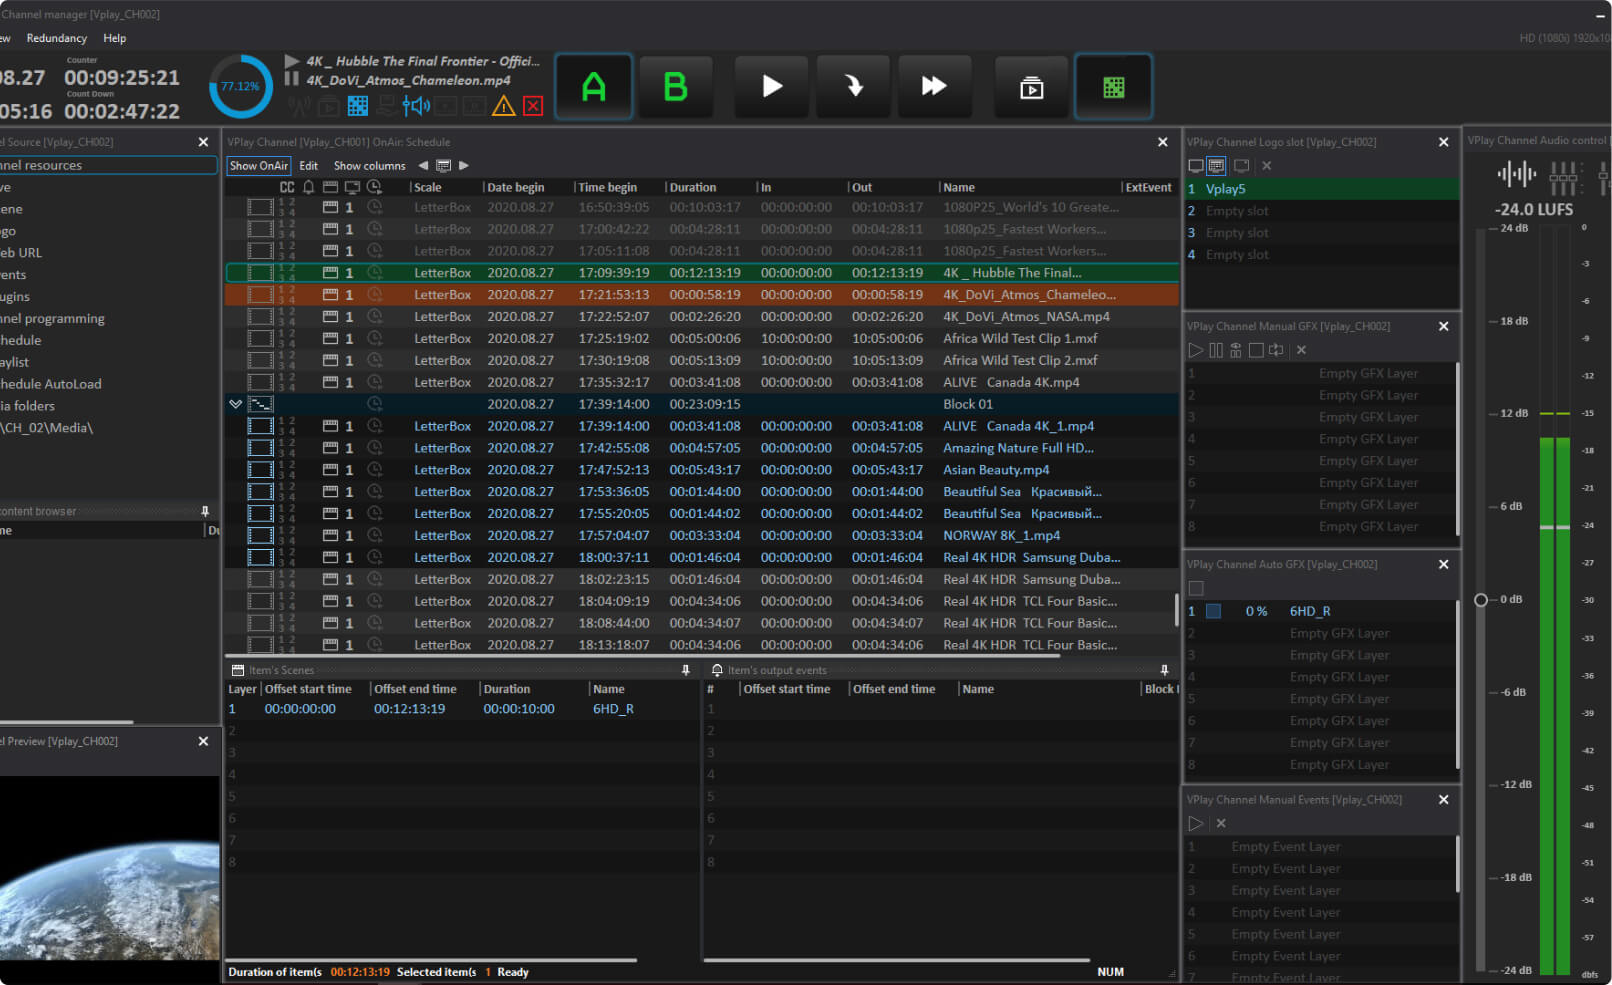 VPlay Сhannel manager Interface